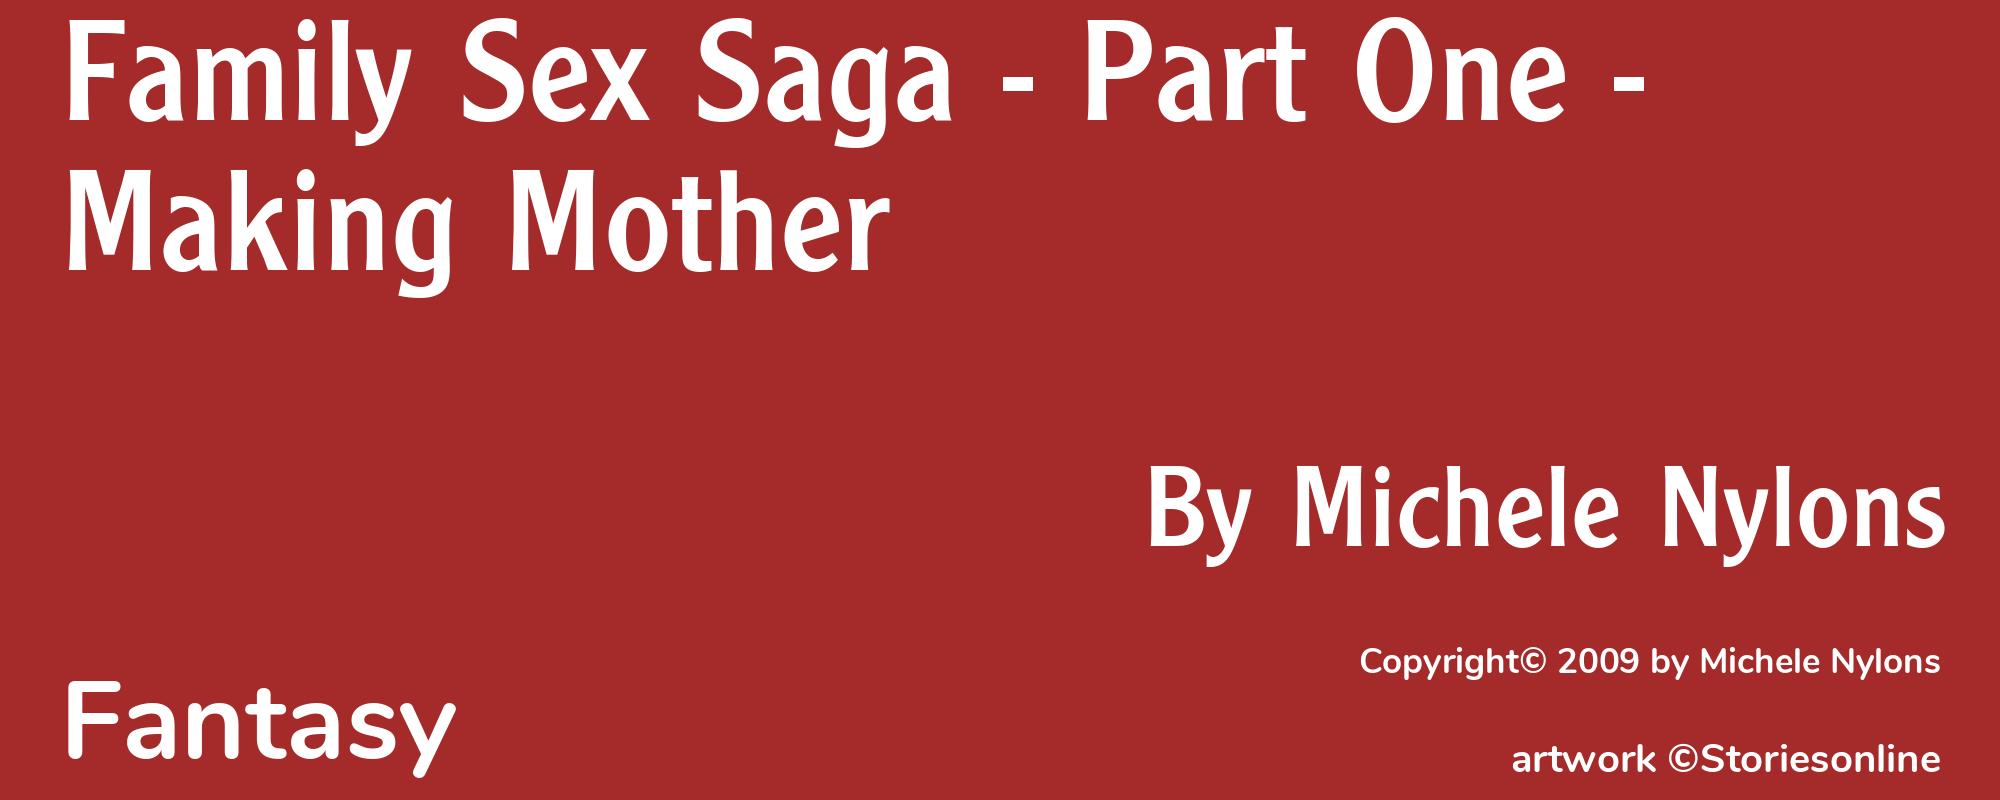 Family Sex Saga - Part One - Making Mother - Cover